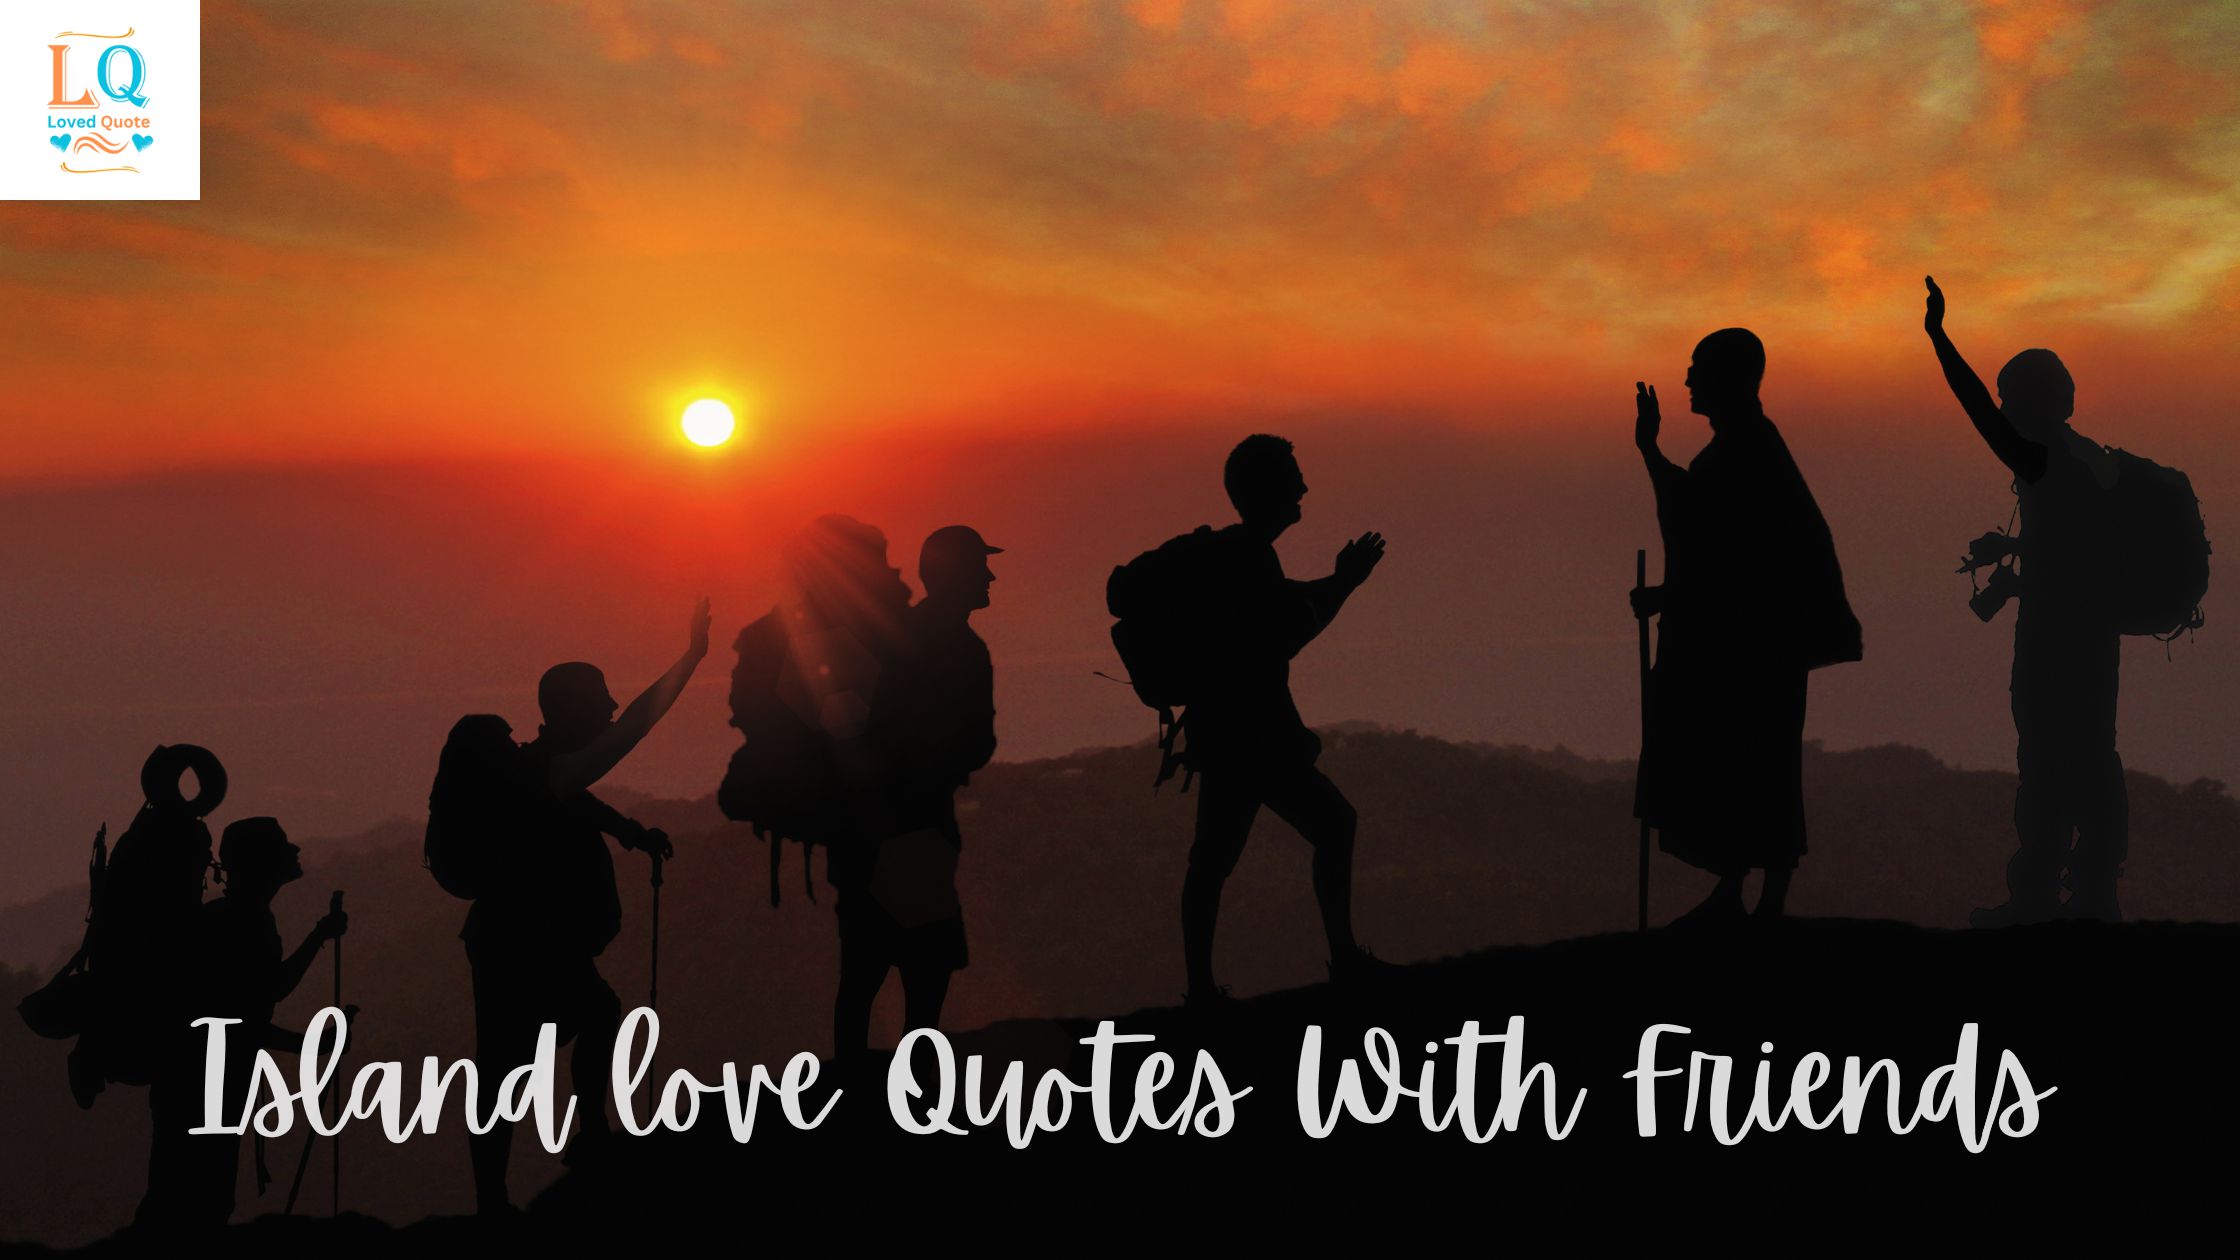 Island love Quotes With Friends